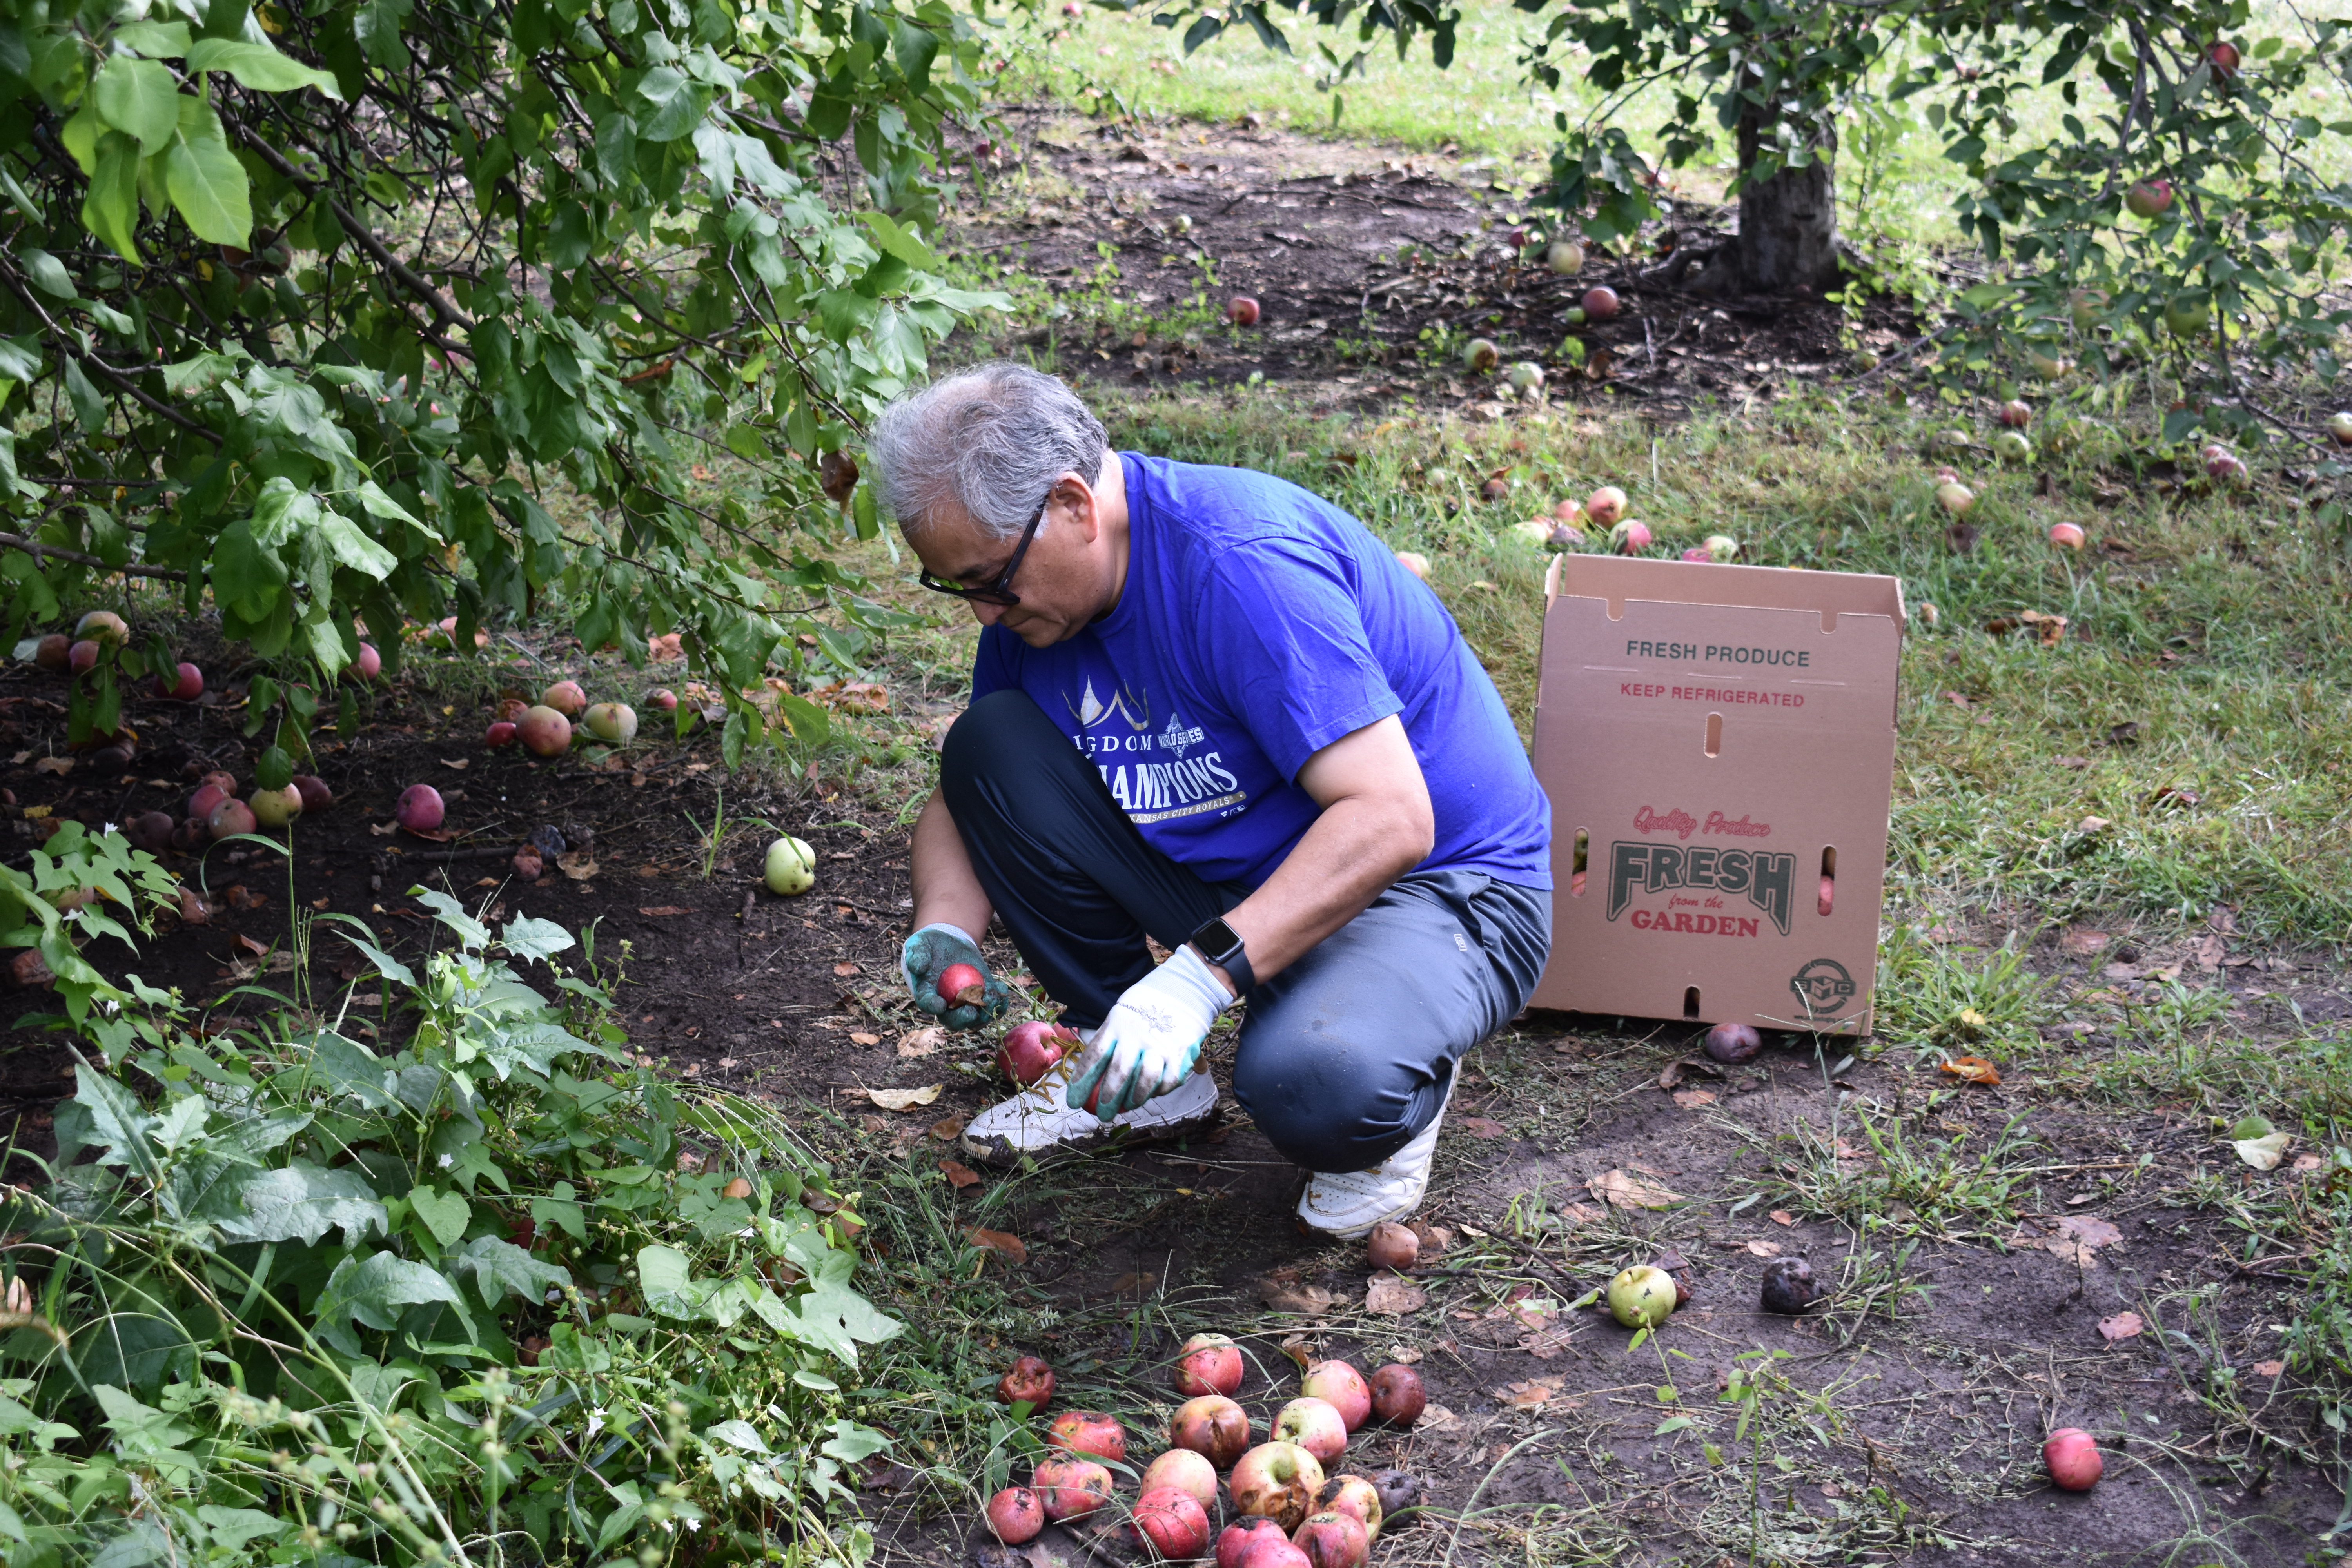 Andres picking up apples during an orchard gleaning event